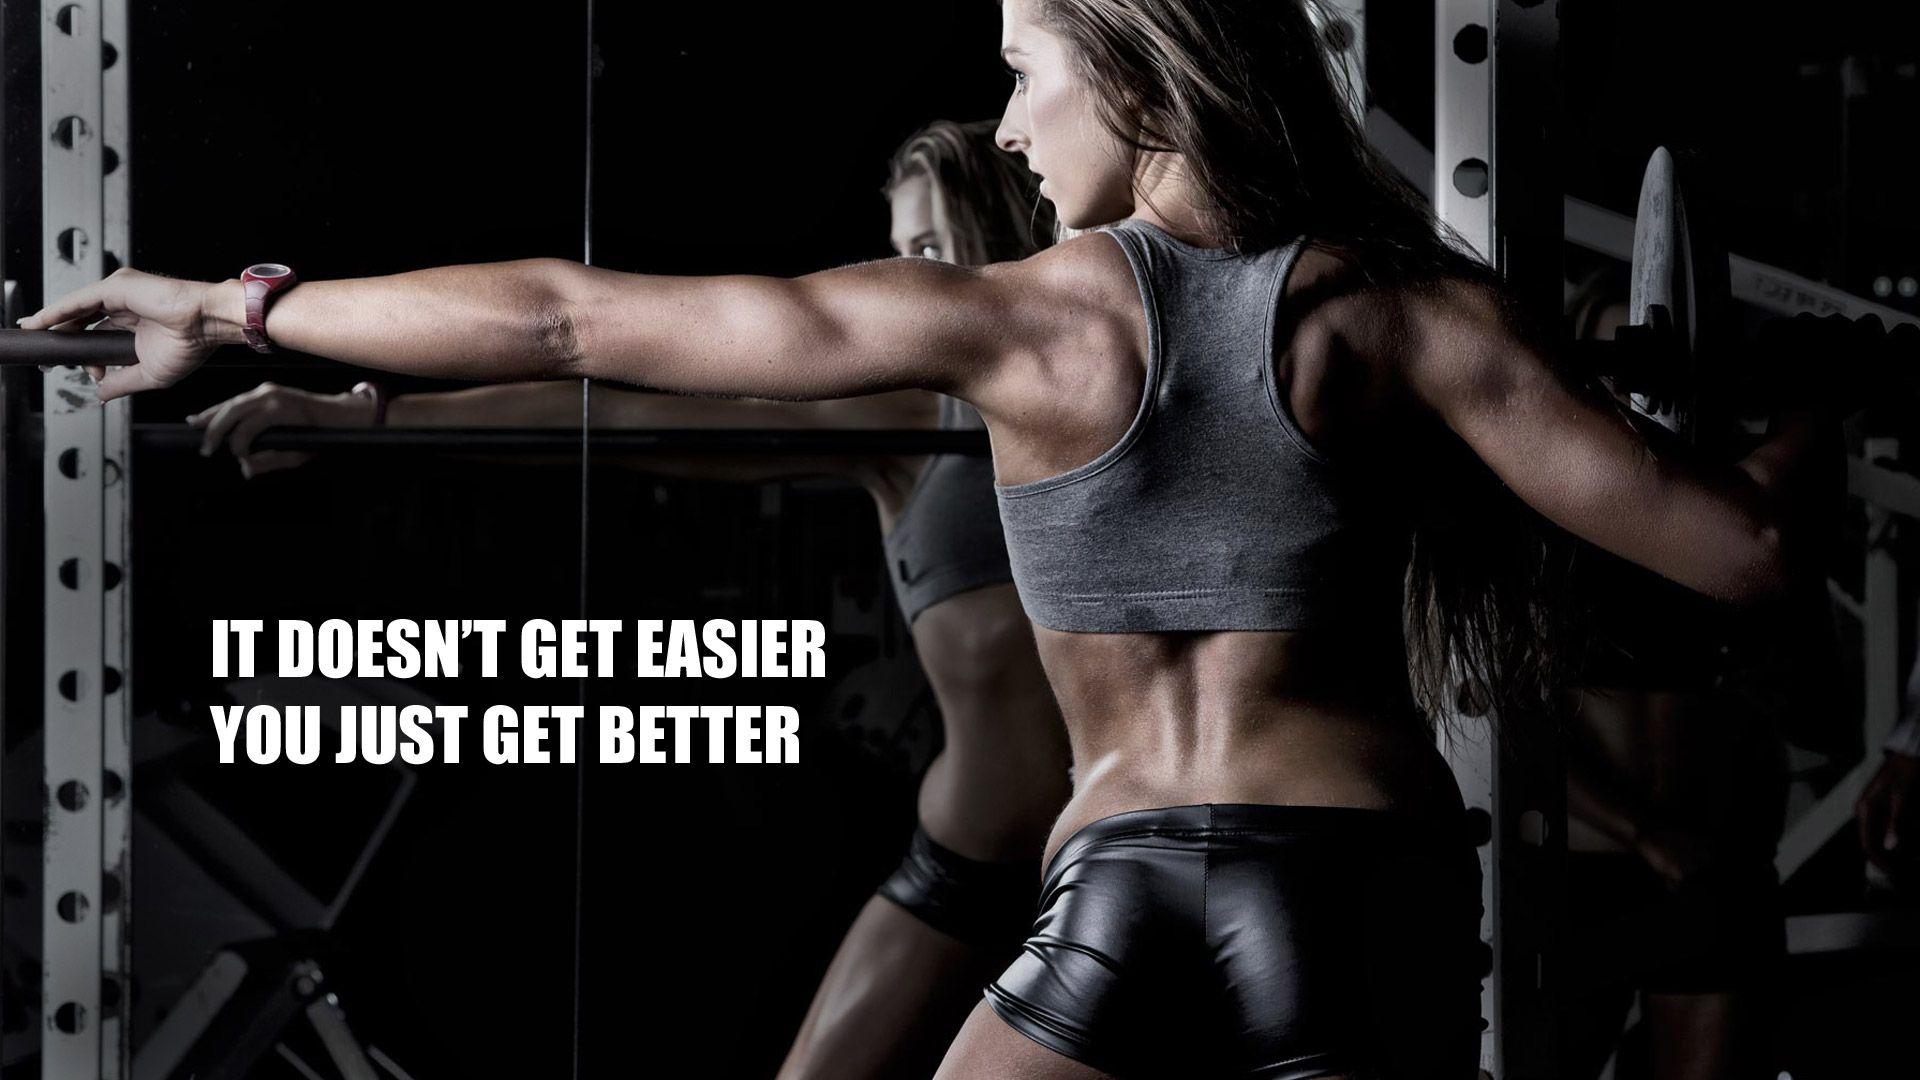 Wallpaper women, fitness, back muscles for mobile and desktop, section  спорт, resolution 7021x4682 - download